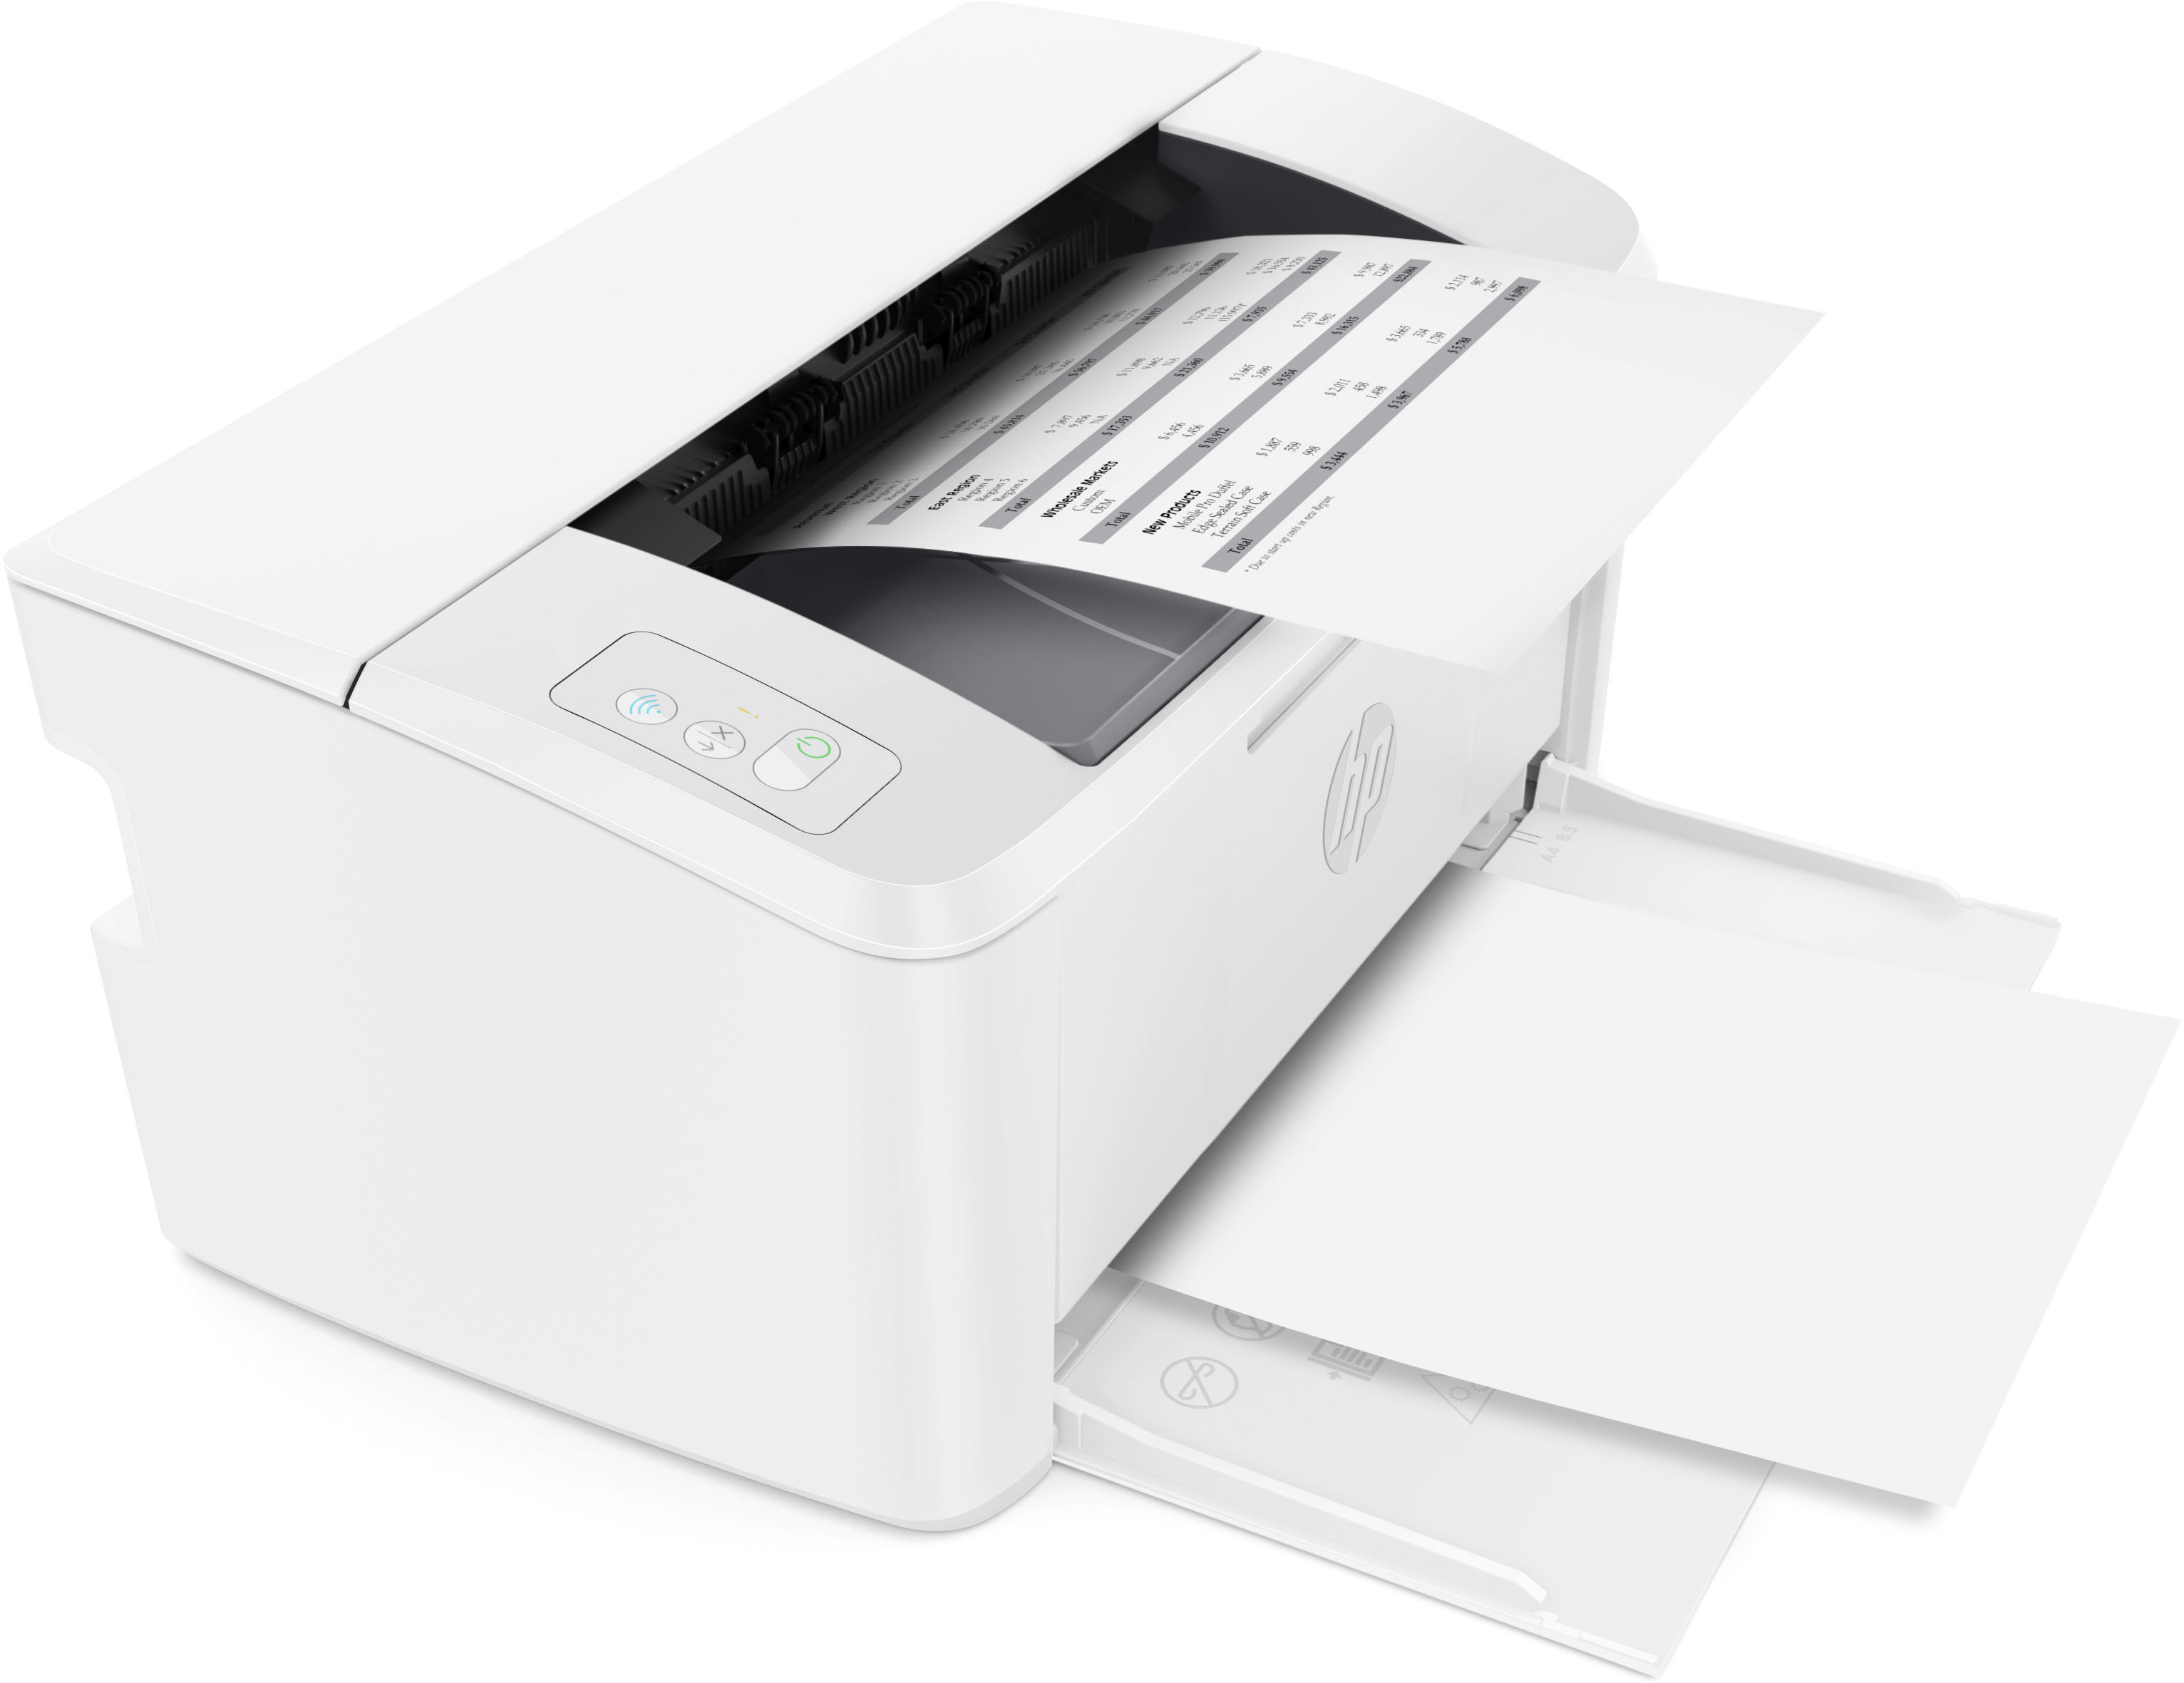 6 - Wireless Ink and Instant White Best HP+ White LaserJet M110we Printer Buy LaserJet with of M110we included Laser HP with months Black